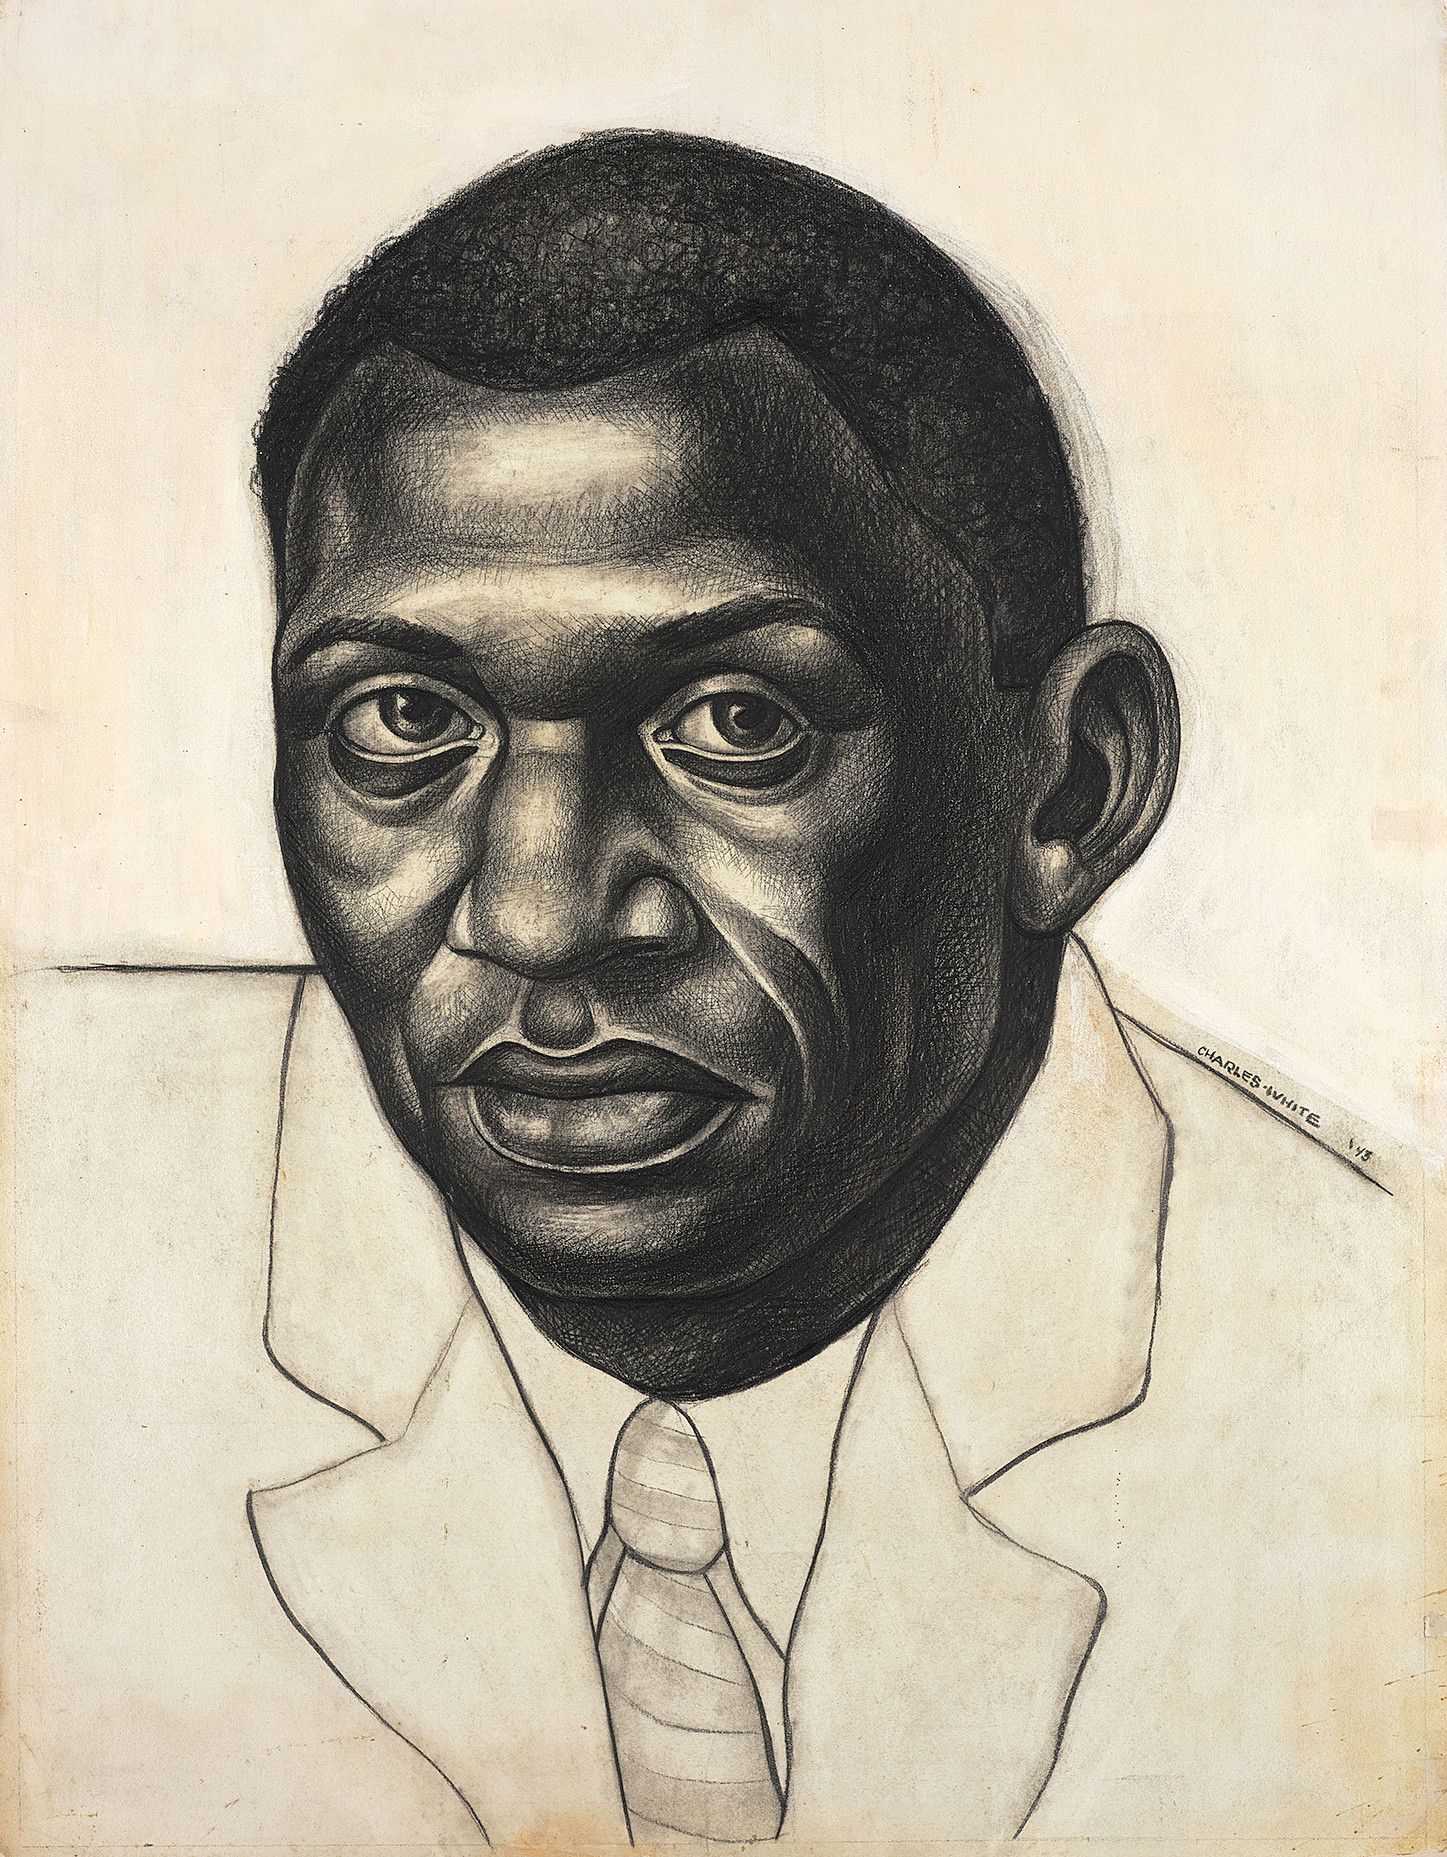 Charles White. _Paul Robeson (Study for Contribution of the Negro to Democracy in America)_. 1942-43. Carbon pencil over charcoal, with additions and corrections in white gouache, and border in carbon pencil, on cream drawing board. 24 7/8 × 19 1/16" (63.2 × 48.4 cm). Princeton University Art Museum. Museum purchase, Kathleen Compton Sherrerd Fund for Acquisitions in American Art. © The Charles White Archives/ Photo: Art Resource, NY
